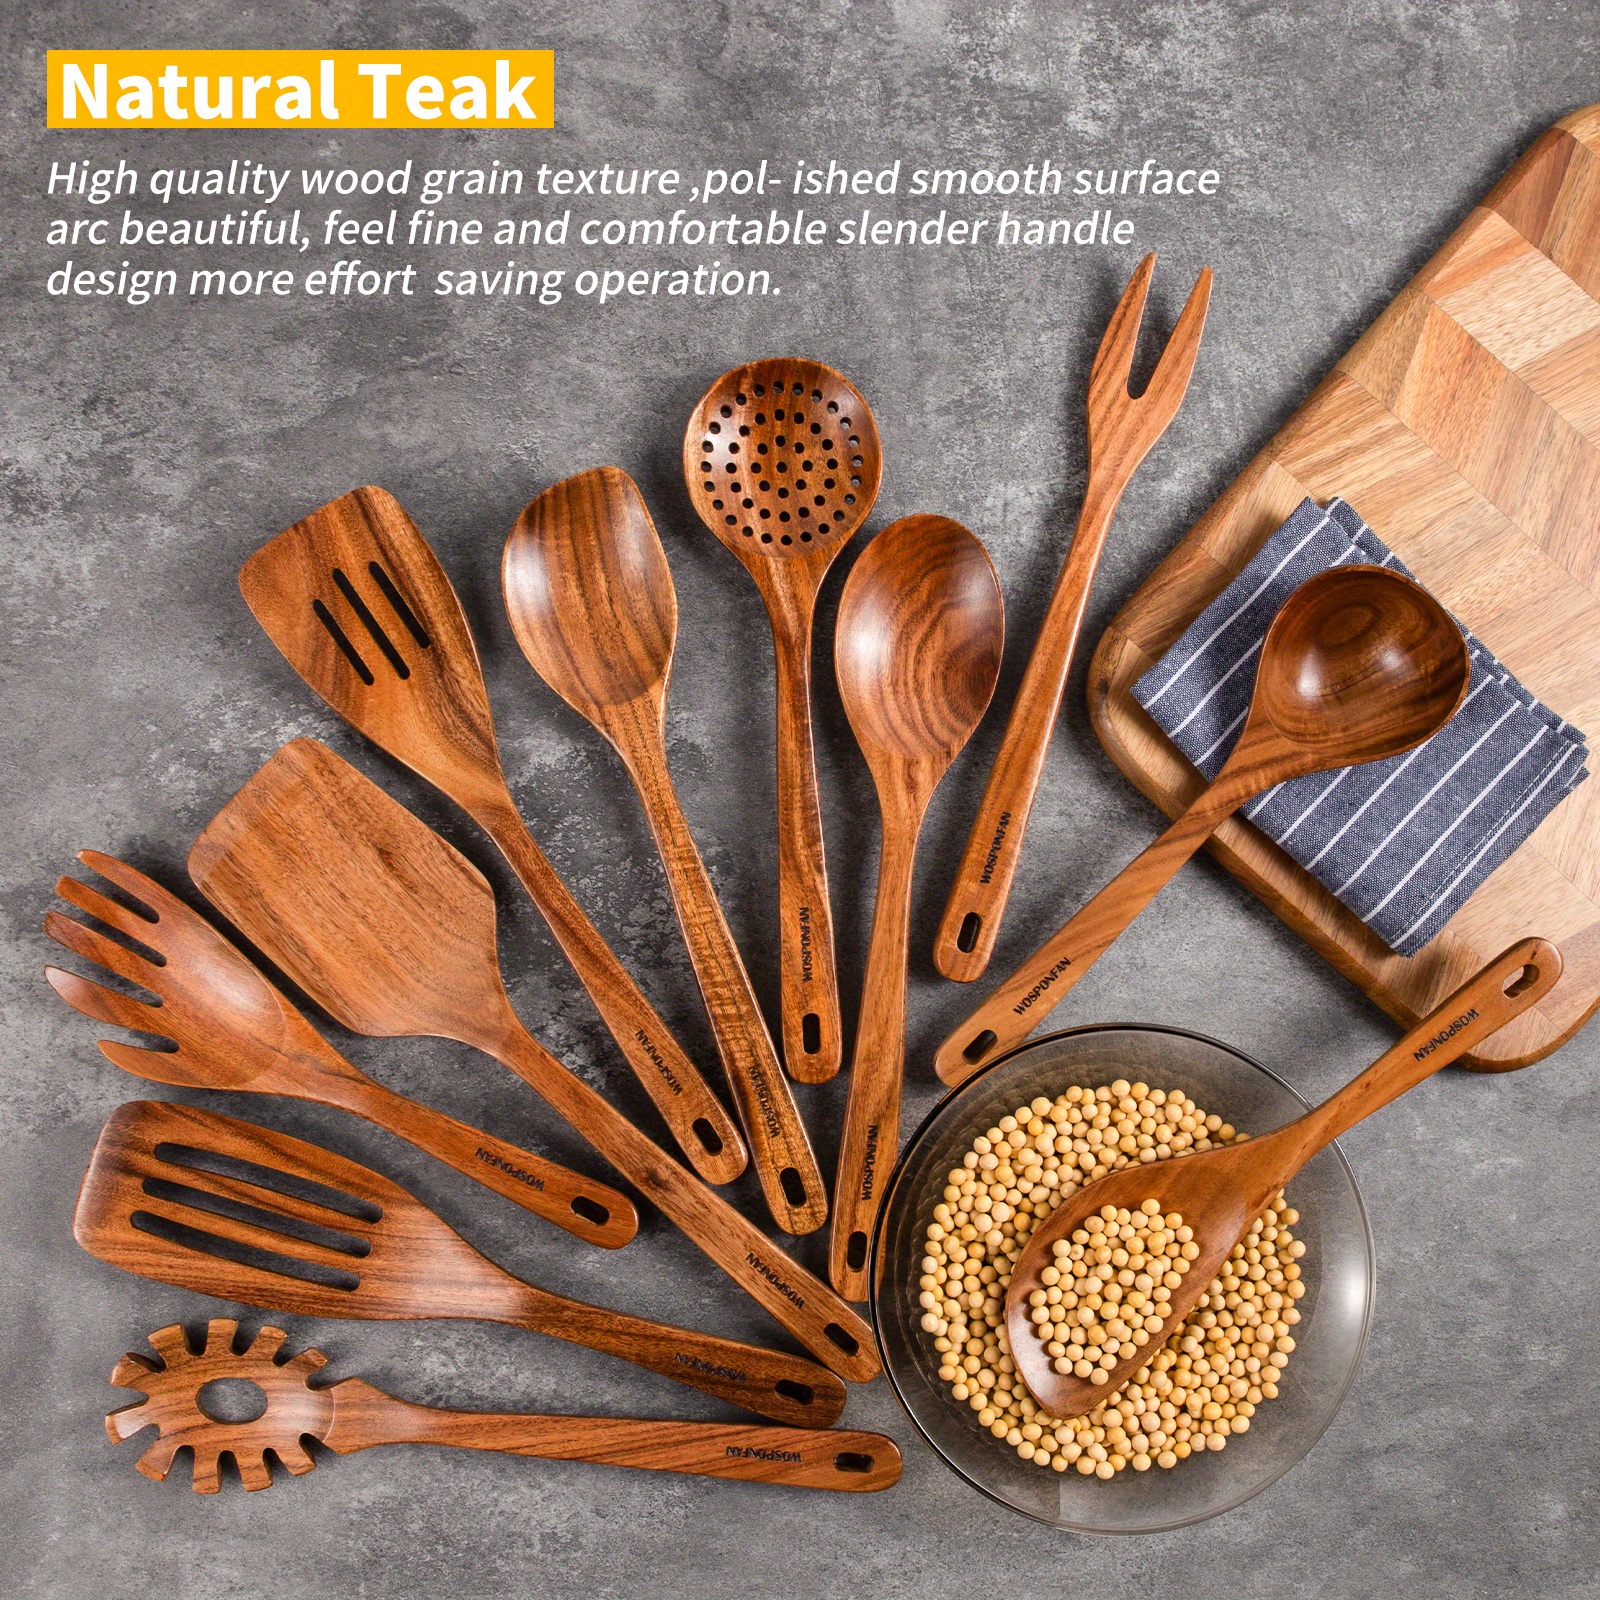 7pcs Wooden Cooking Utensils For Kitchen, Nonstick Non Scratch Natural Teak  Wooden Utensils For Cooking, Back To School Supplies